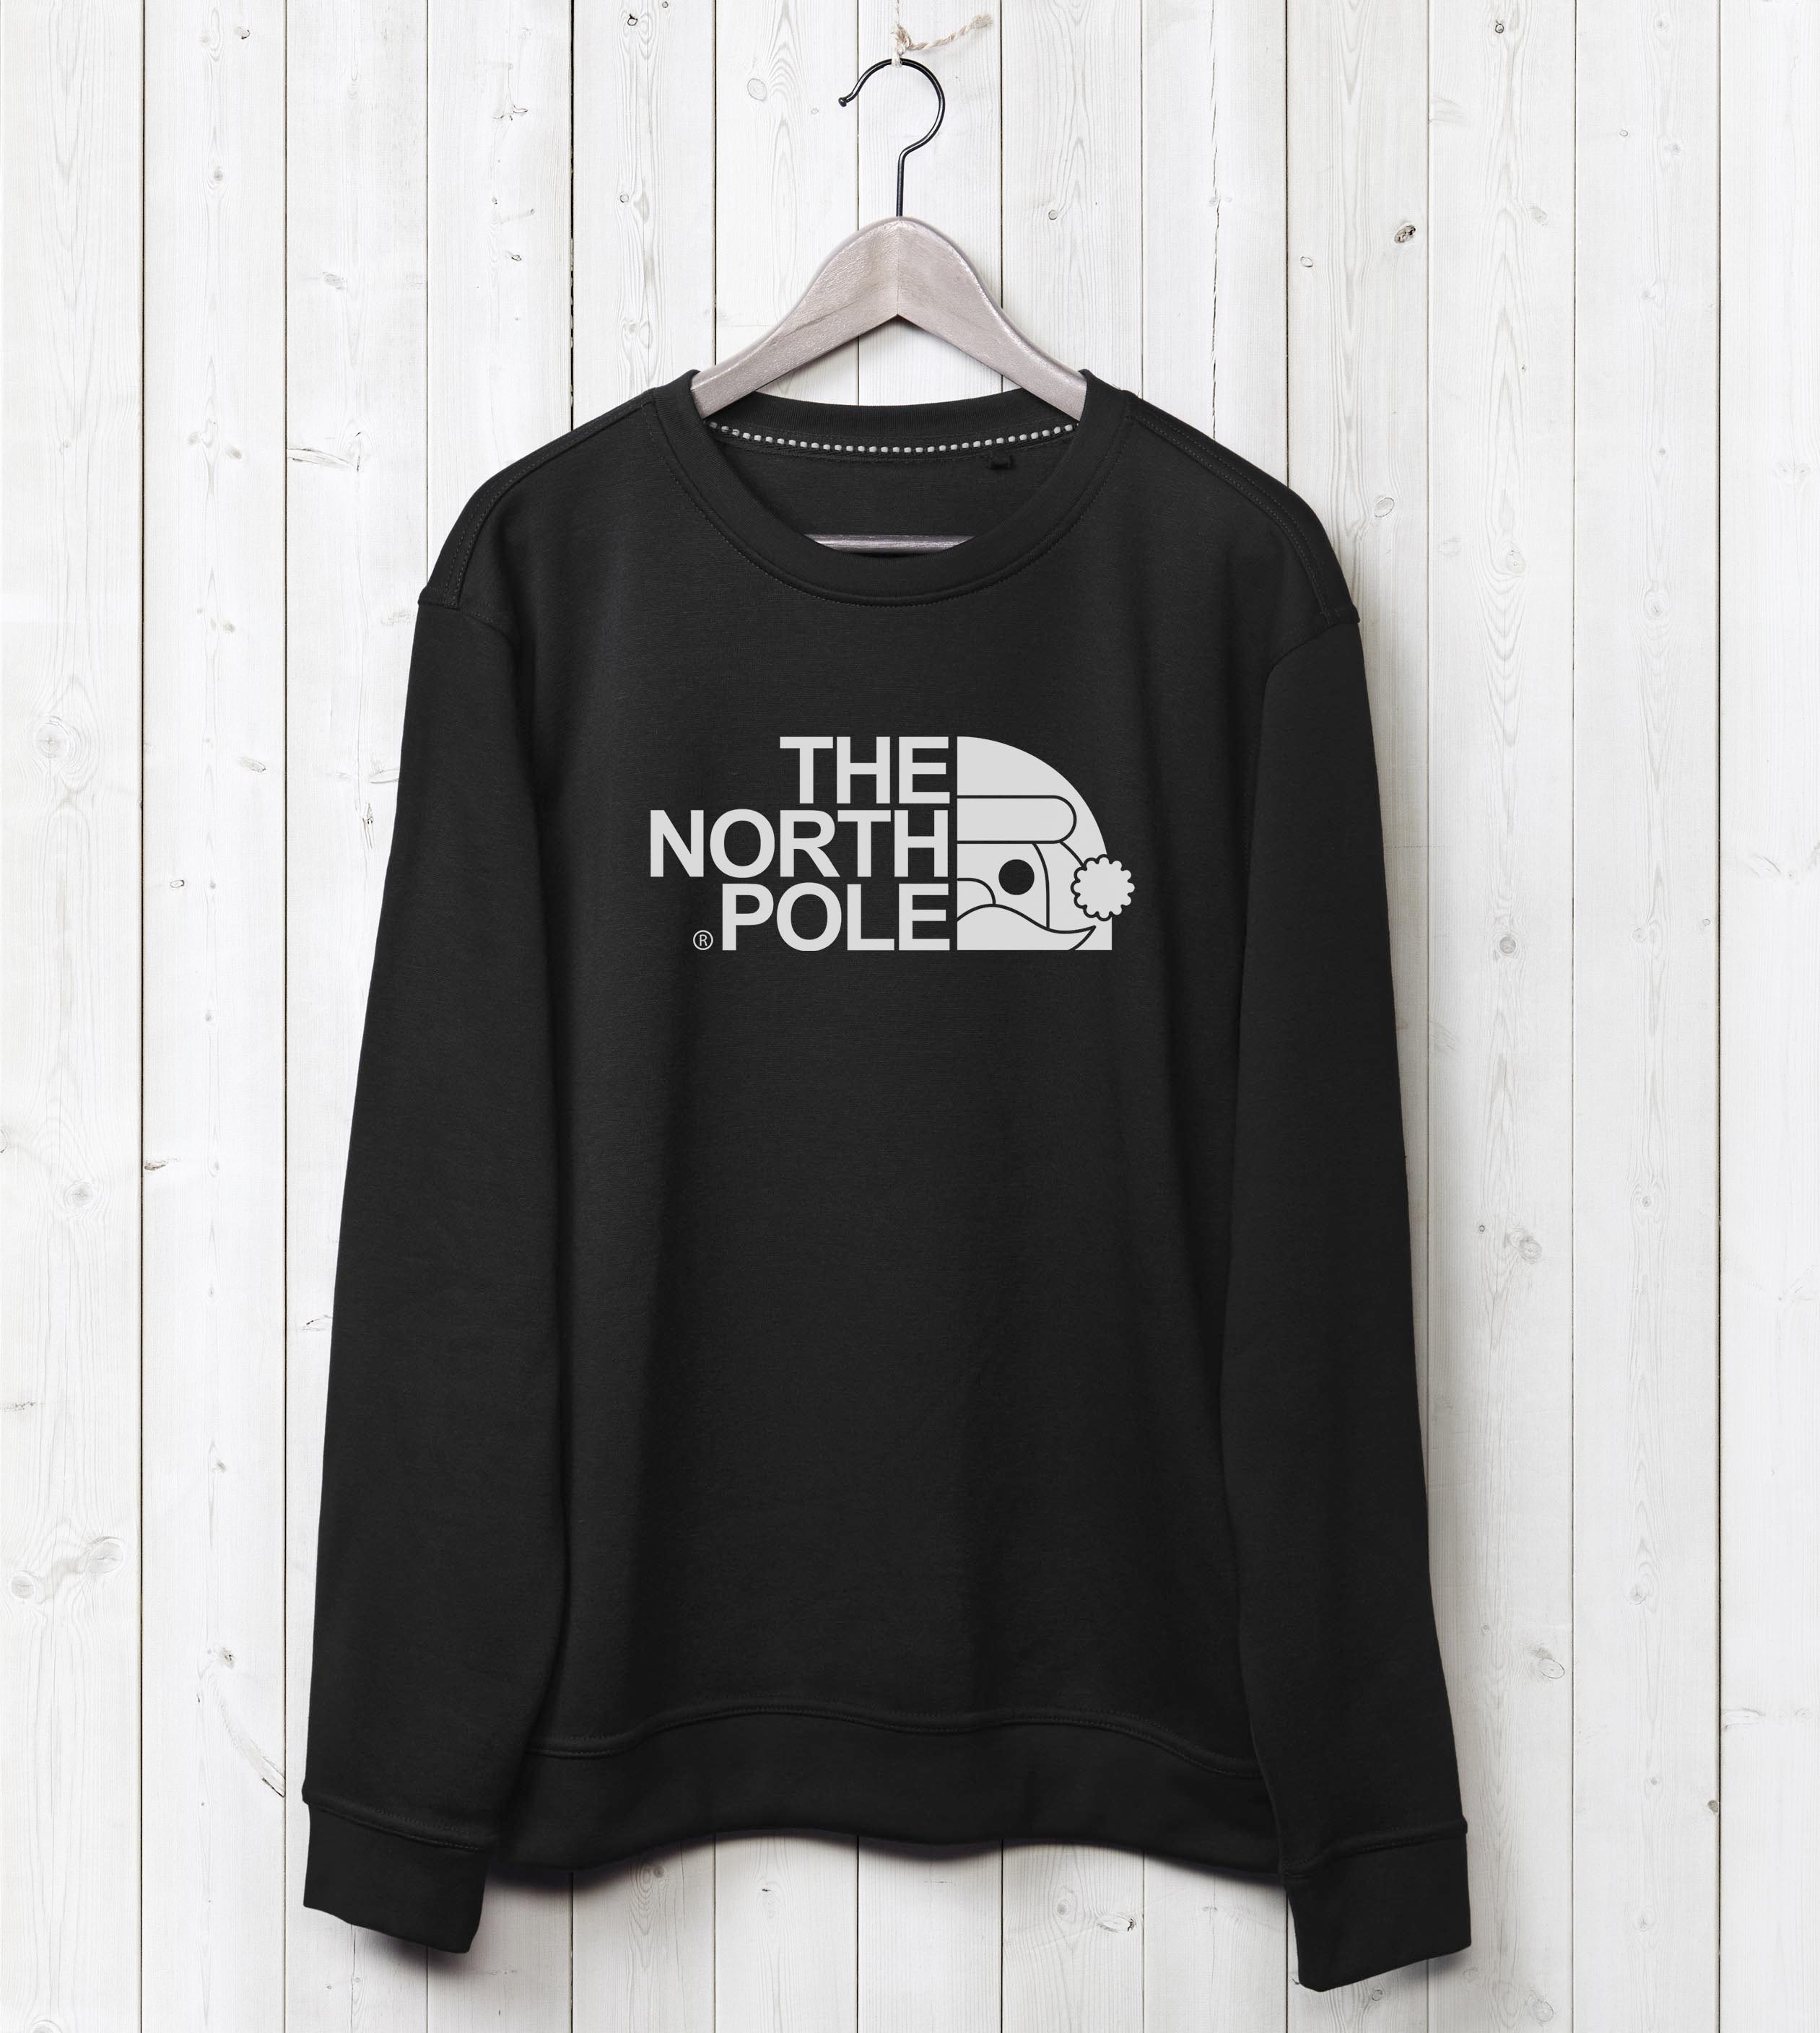 The North Pole - Sweater